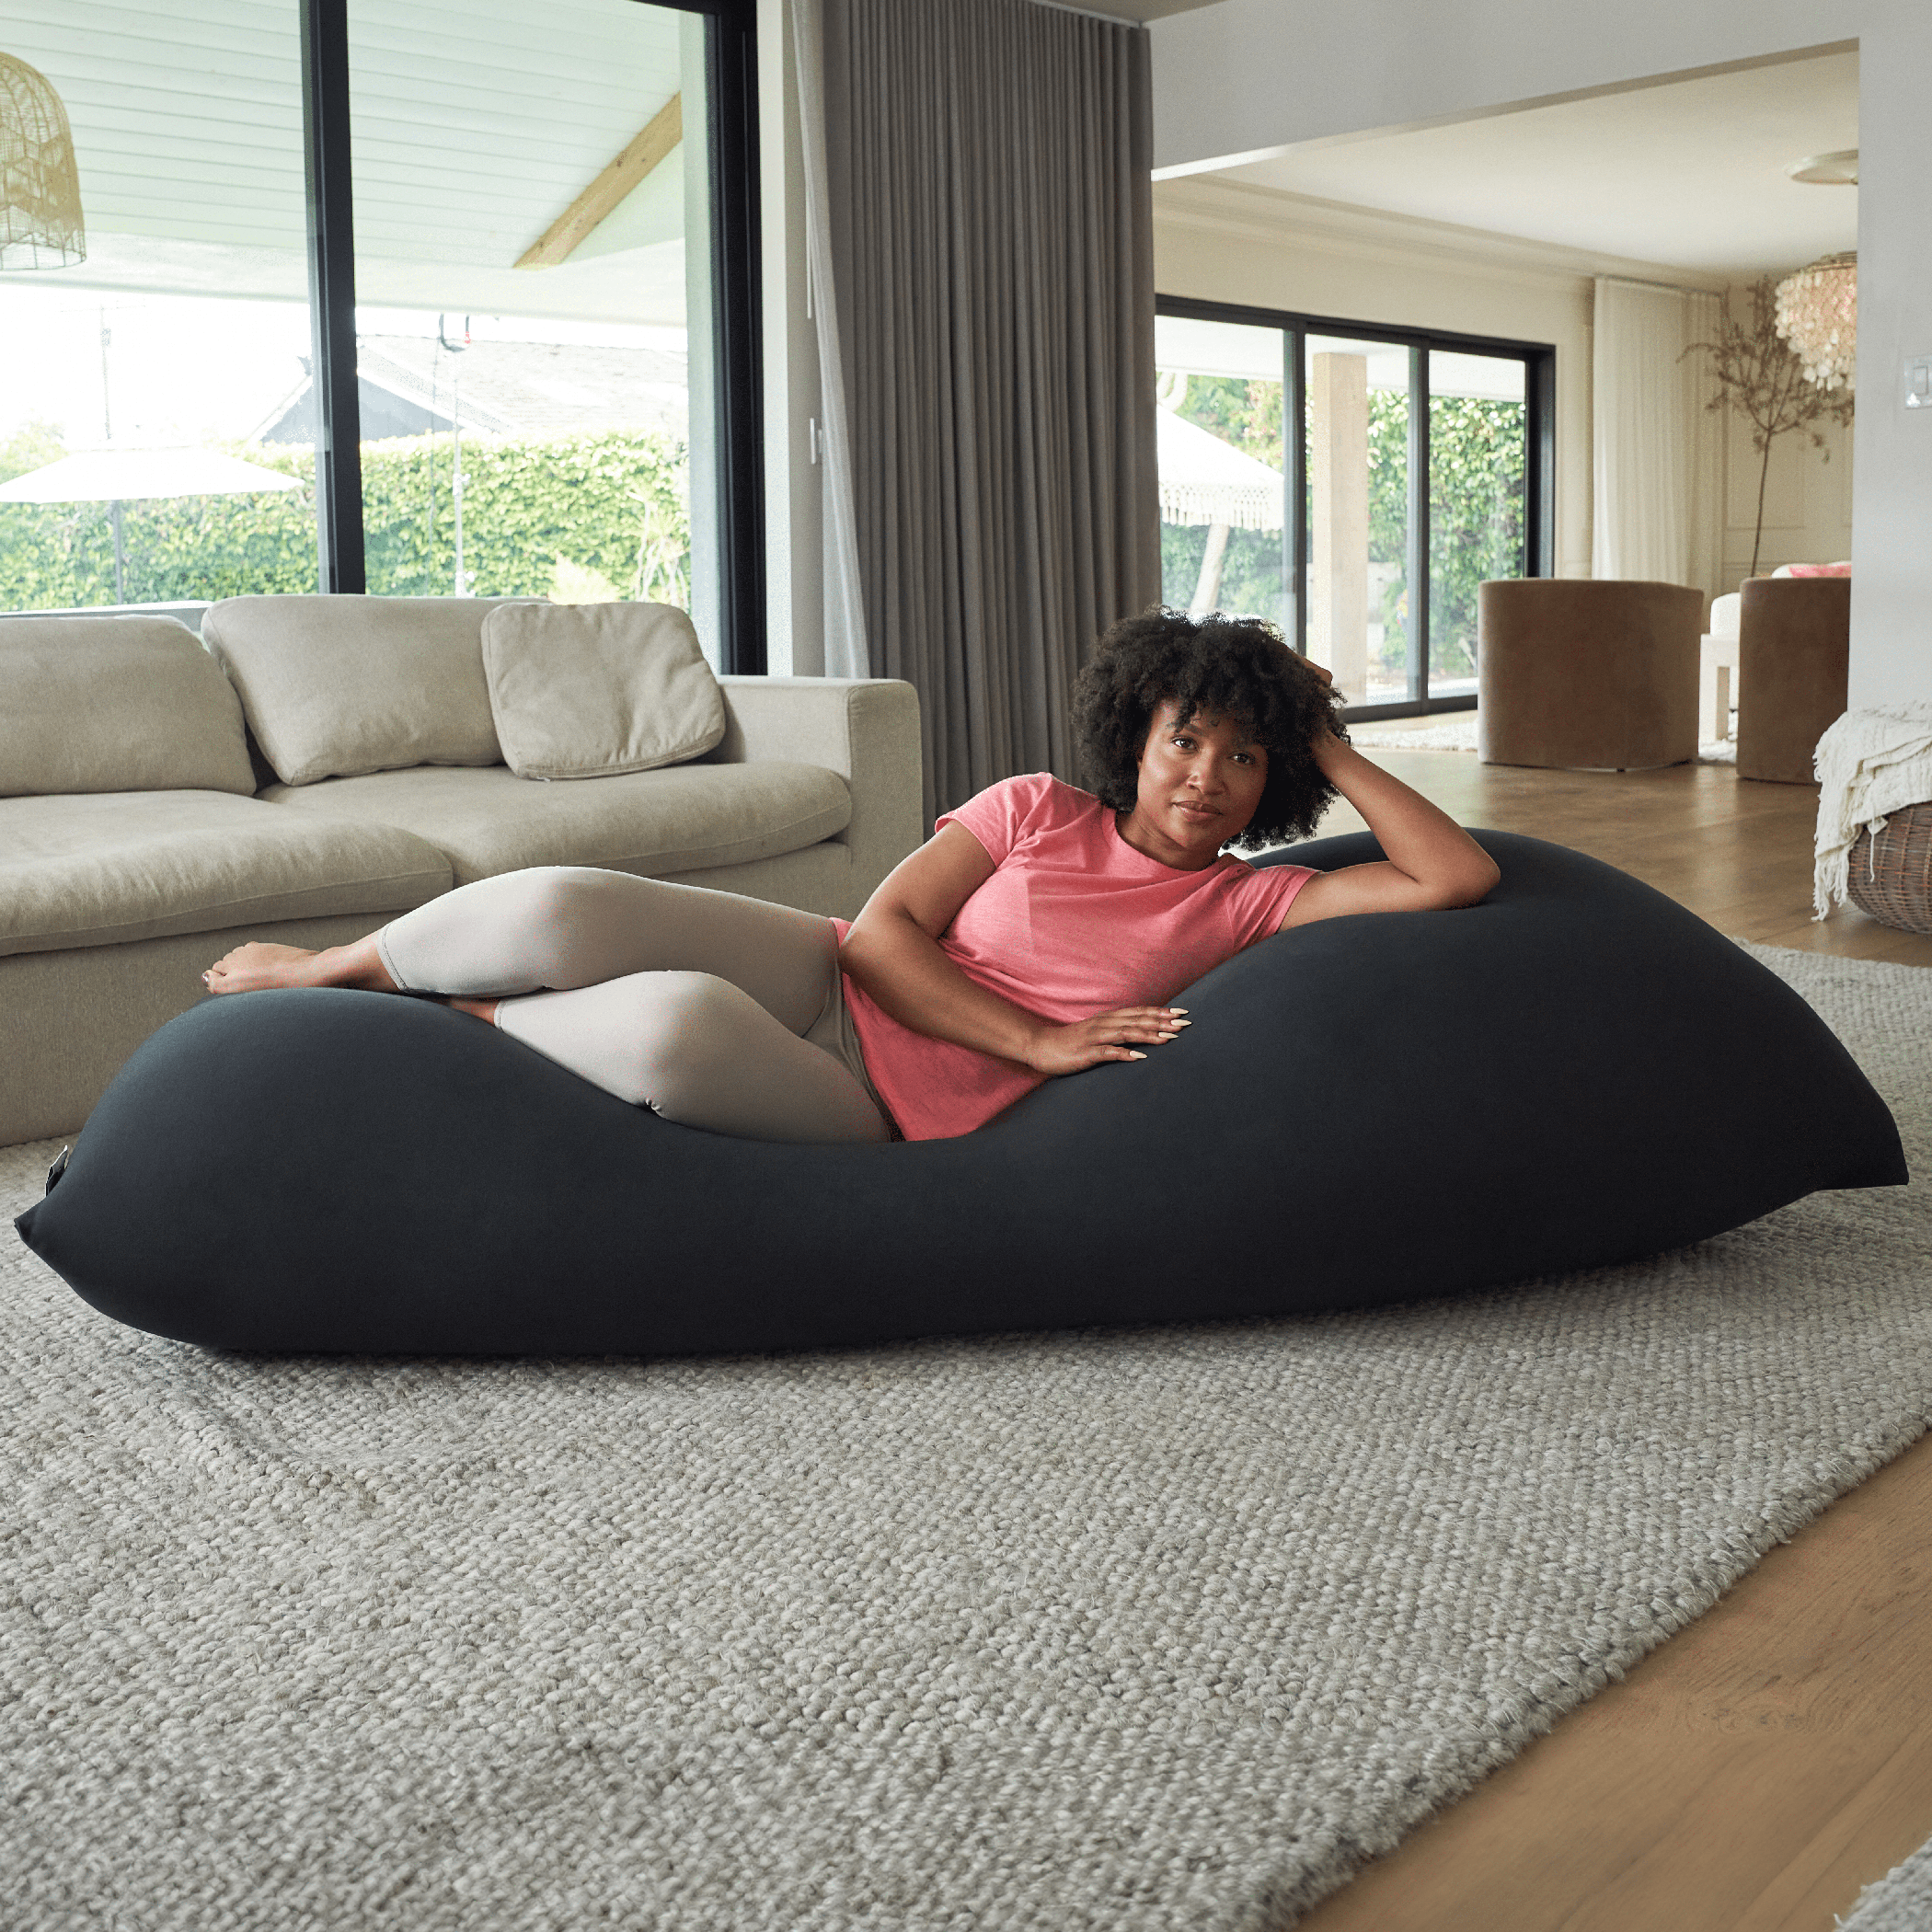 FAFAD Bean Bag Chairs Giant Bean Bag Chair for Adults 6ft Big Bean Bag  Cover Comfy Bean Bag Bed No Filler Cover only Fluffy Lazy Sofa Black  6ft15075cm  Amazonin Home 